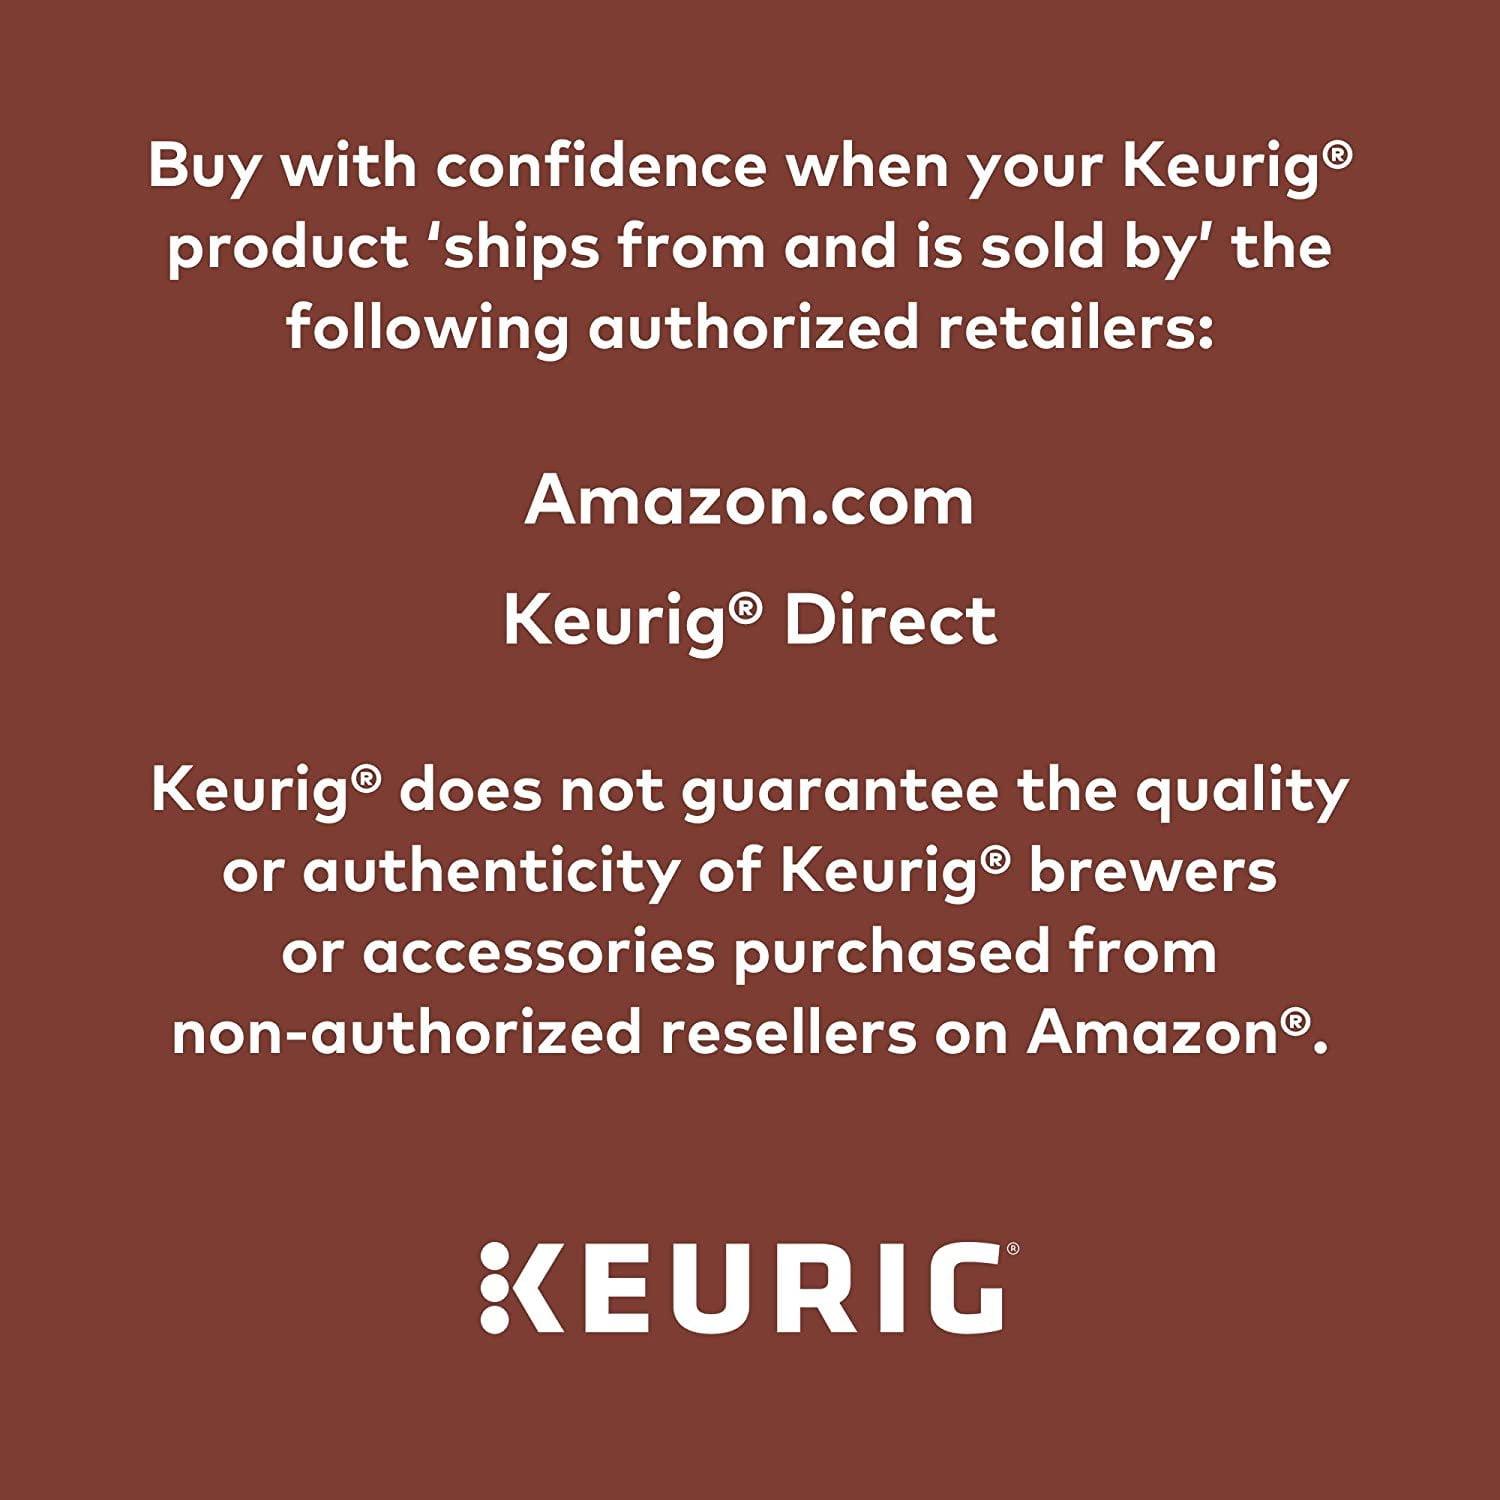 5000204977 Keurig K-Duo Coffee Maker, Single Serve and 12-Cup Carafe Drip Coffee  Brewer, Compatible with K-Cup Pods and Ground Coffee, Black - Black Friday